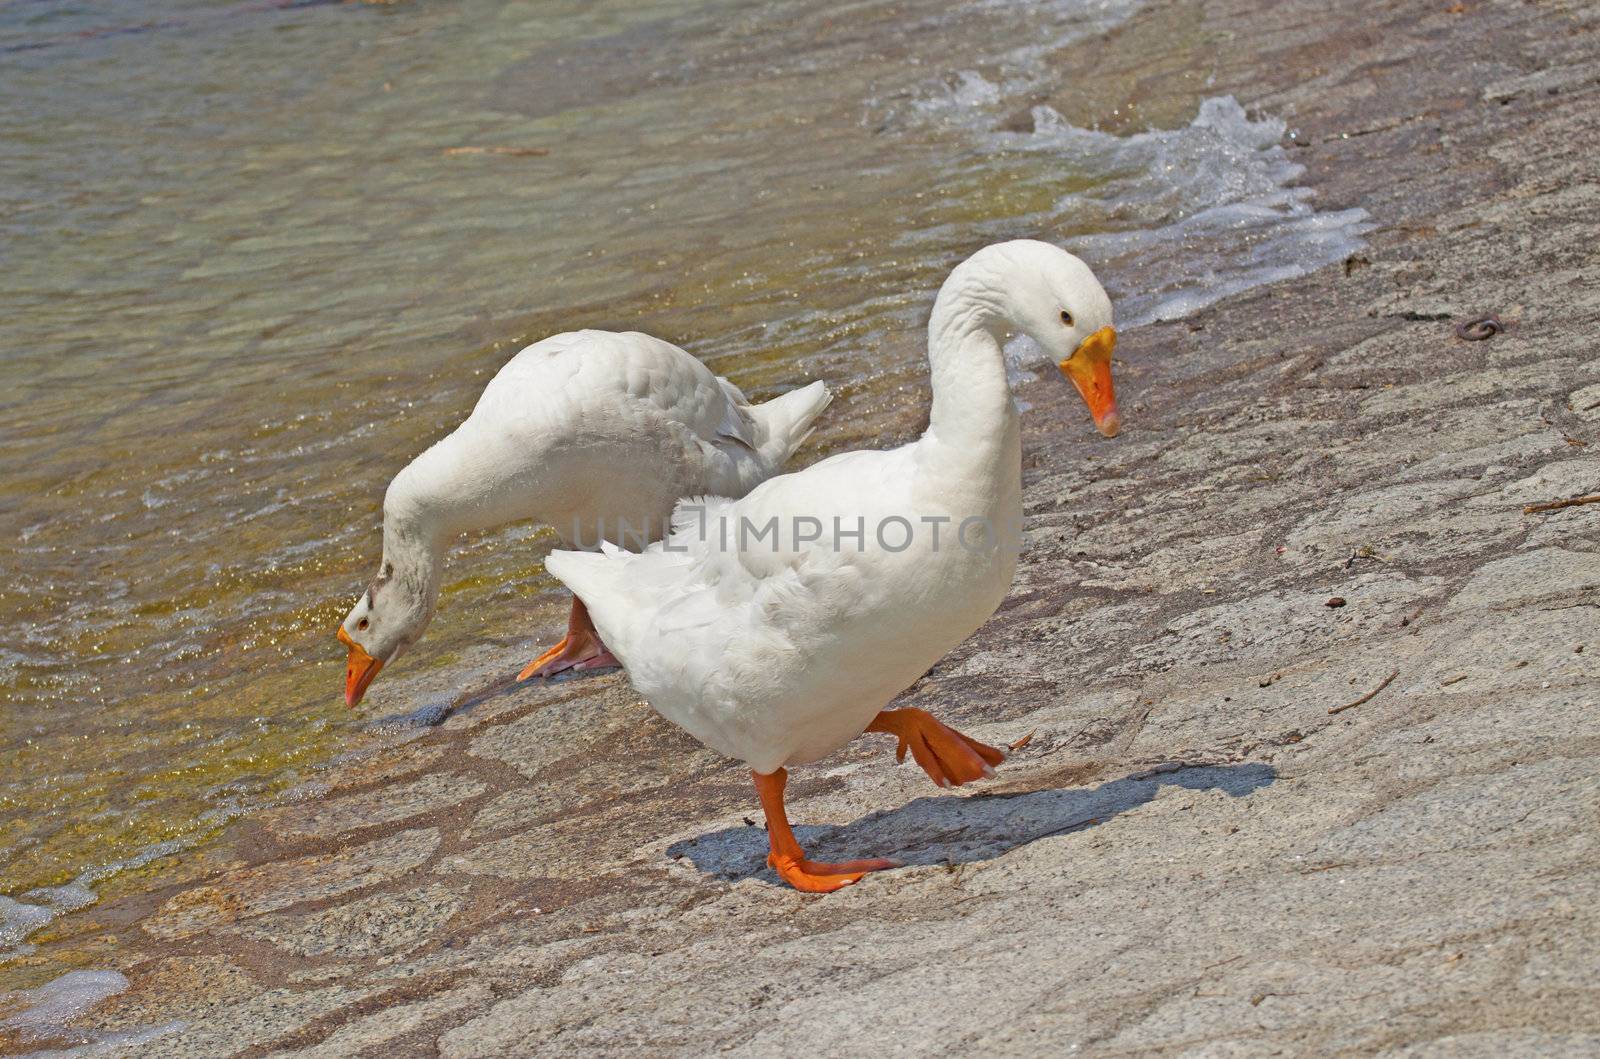 Two ducks walking cautiously near the water